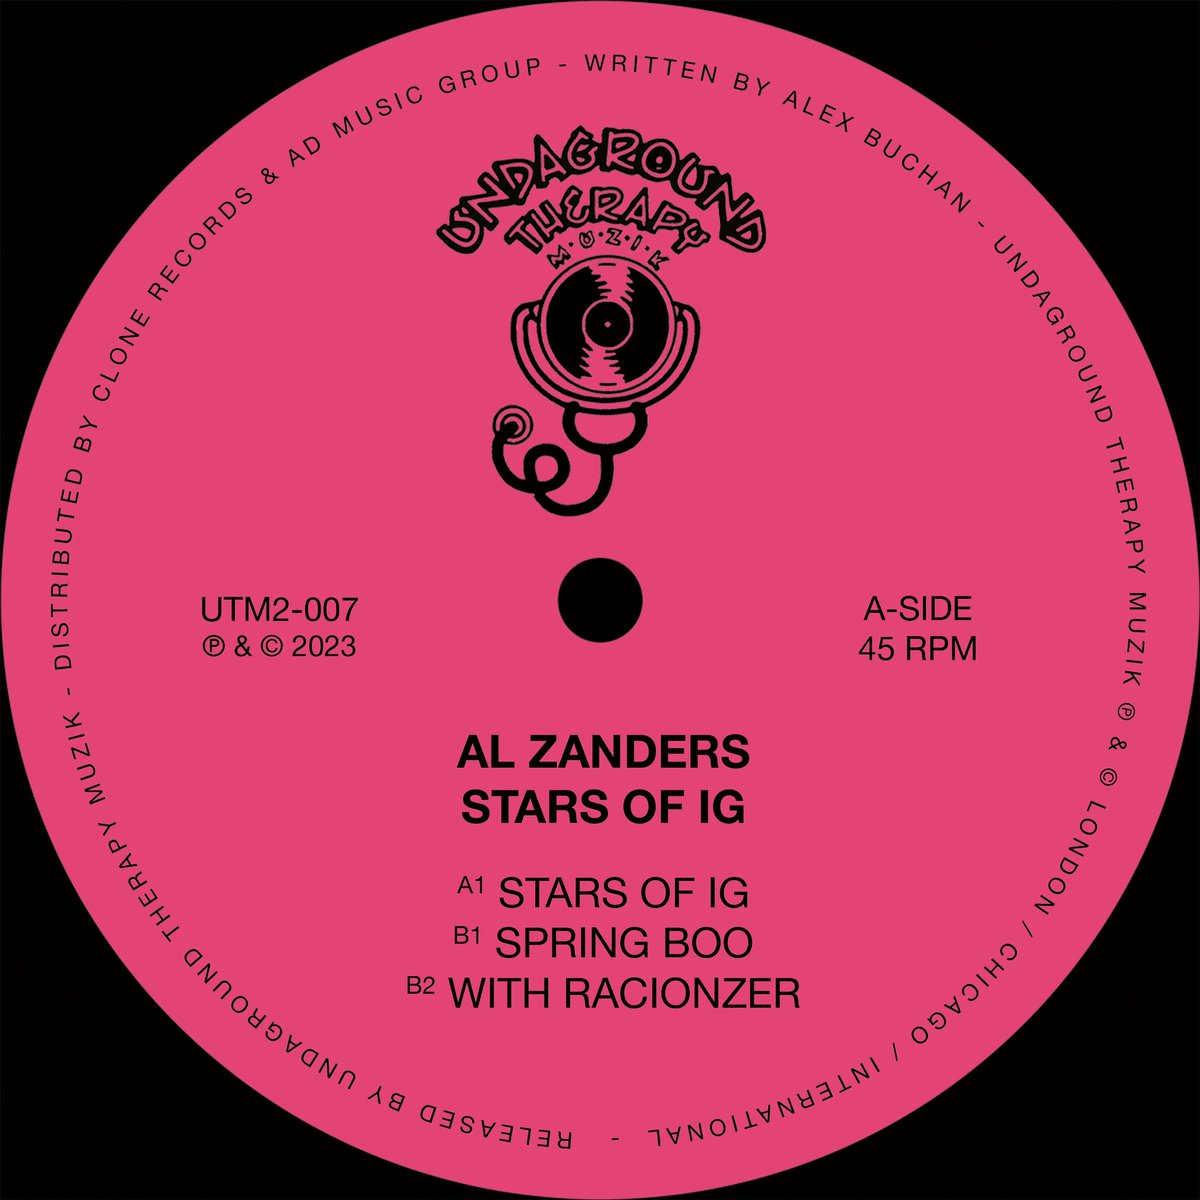 Al Zanders first EP in 5 years and his return to the label. Stars of IG is out now. soundcloud.com/undagroundther… @AlZanders